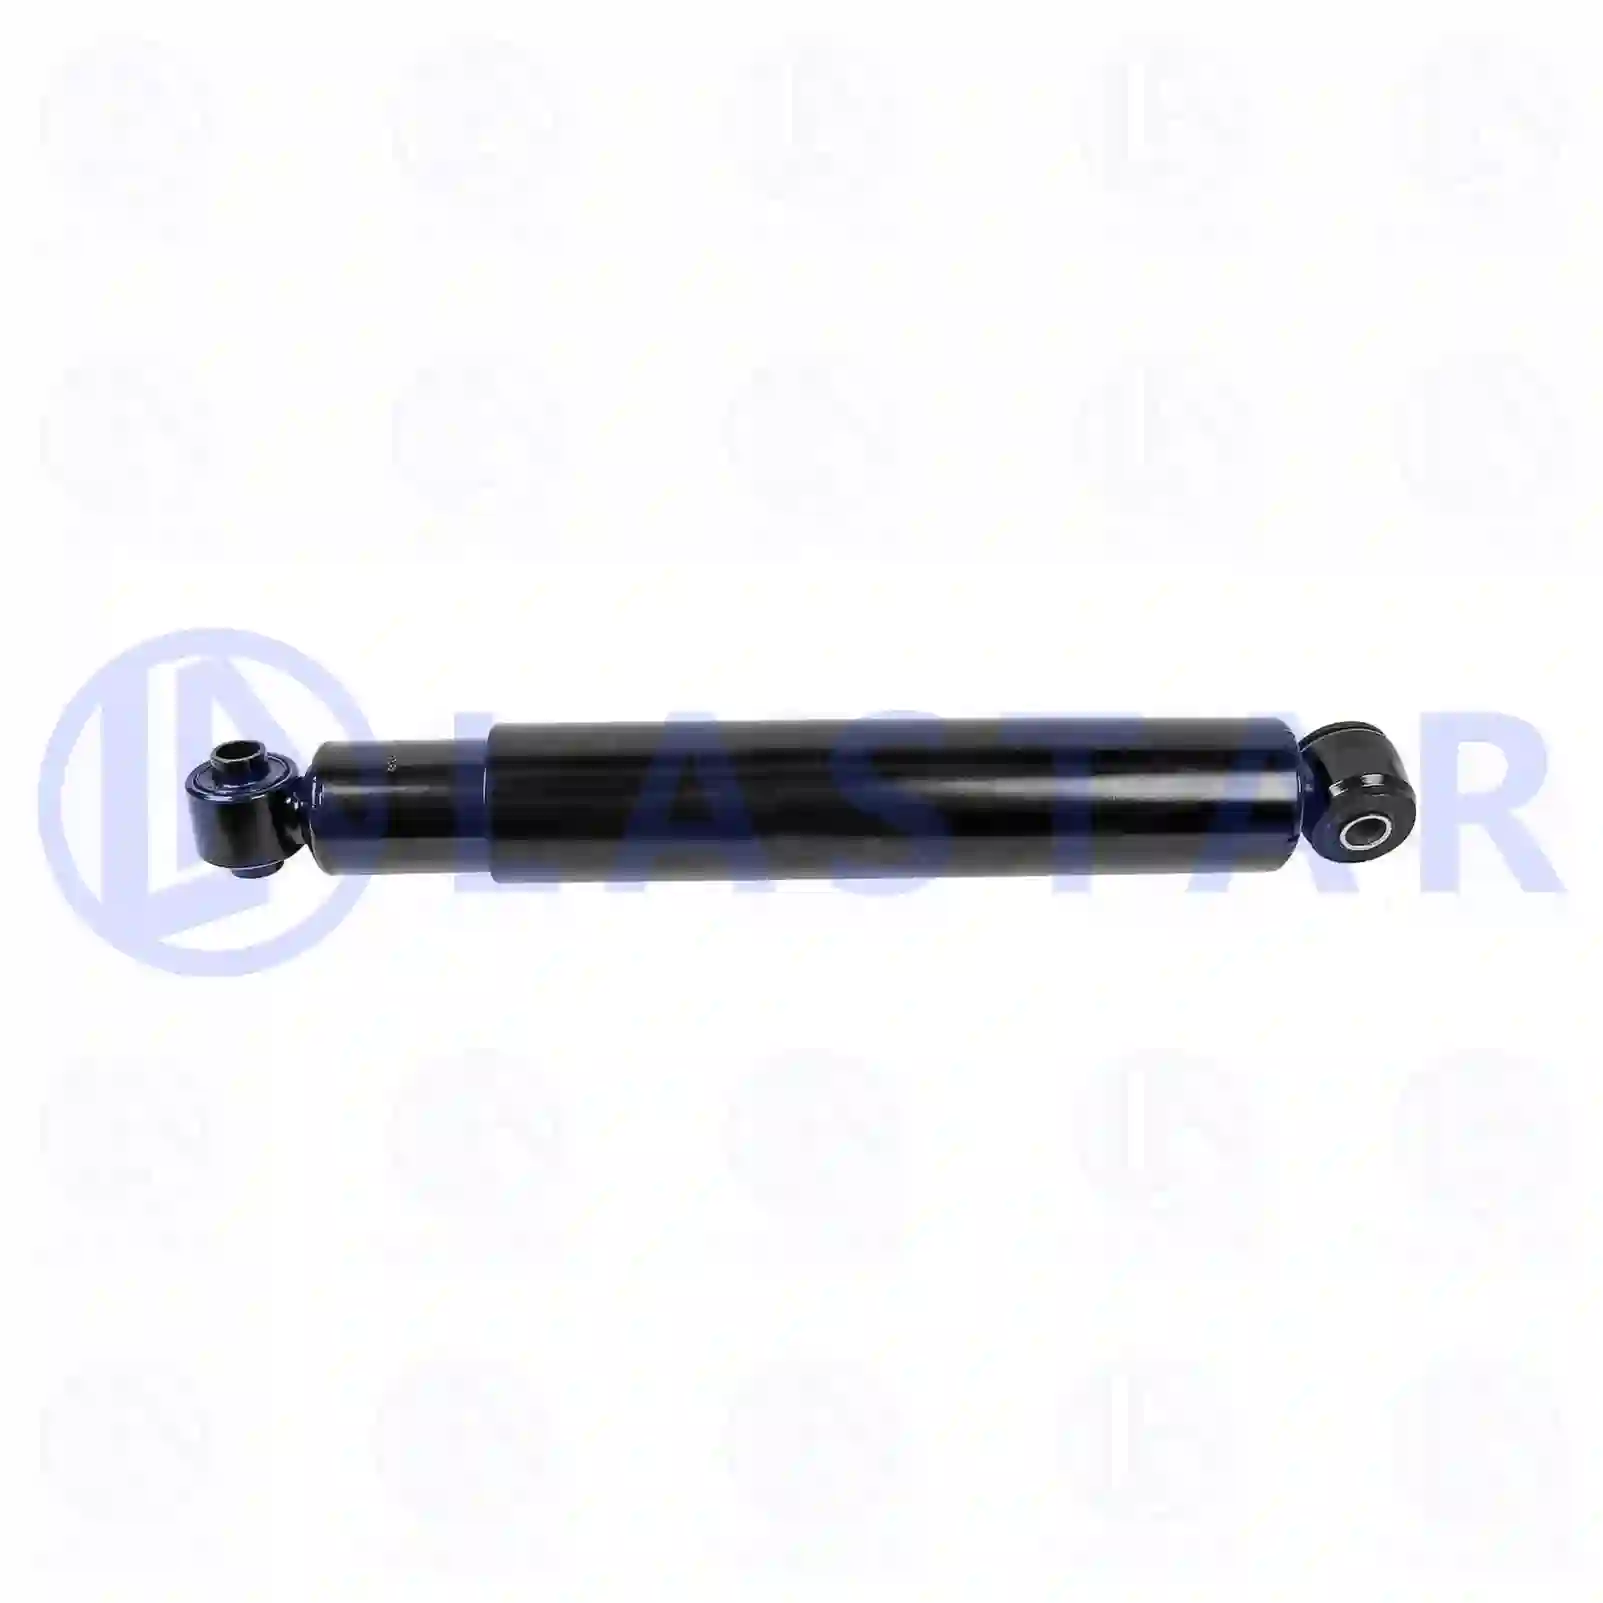 Shock absorber, 77728876, 5010294908, 5010294909, 5010383685, 5010383686, 5010239642, 5010294908, 5010294909, 5010383685, 5010383686, 5010557326, 7482293198, 7482293222, 7482293227, 7482293231, ZG41631-0008 ||  77728876 Lastar Spare Part | Truck Spare Parts, Auotomotive Spare Parts Shock absorber, 77728876, 5010294908, 5010294909, 5010383685, 5010383686, 5010239642, 5010294908, 5010294909, 5010383685, 5010383686, 5010557326, 7482293198, 7482293222, 7482293227, 7482293231, ZG41631-0008 ||  77728876 Lastar Spare Part | Truck Spare Parts, Auotomotive Spare Parts